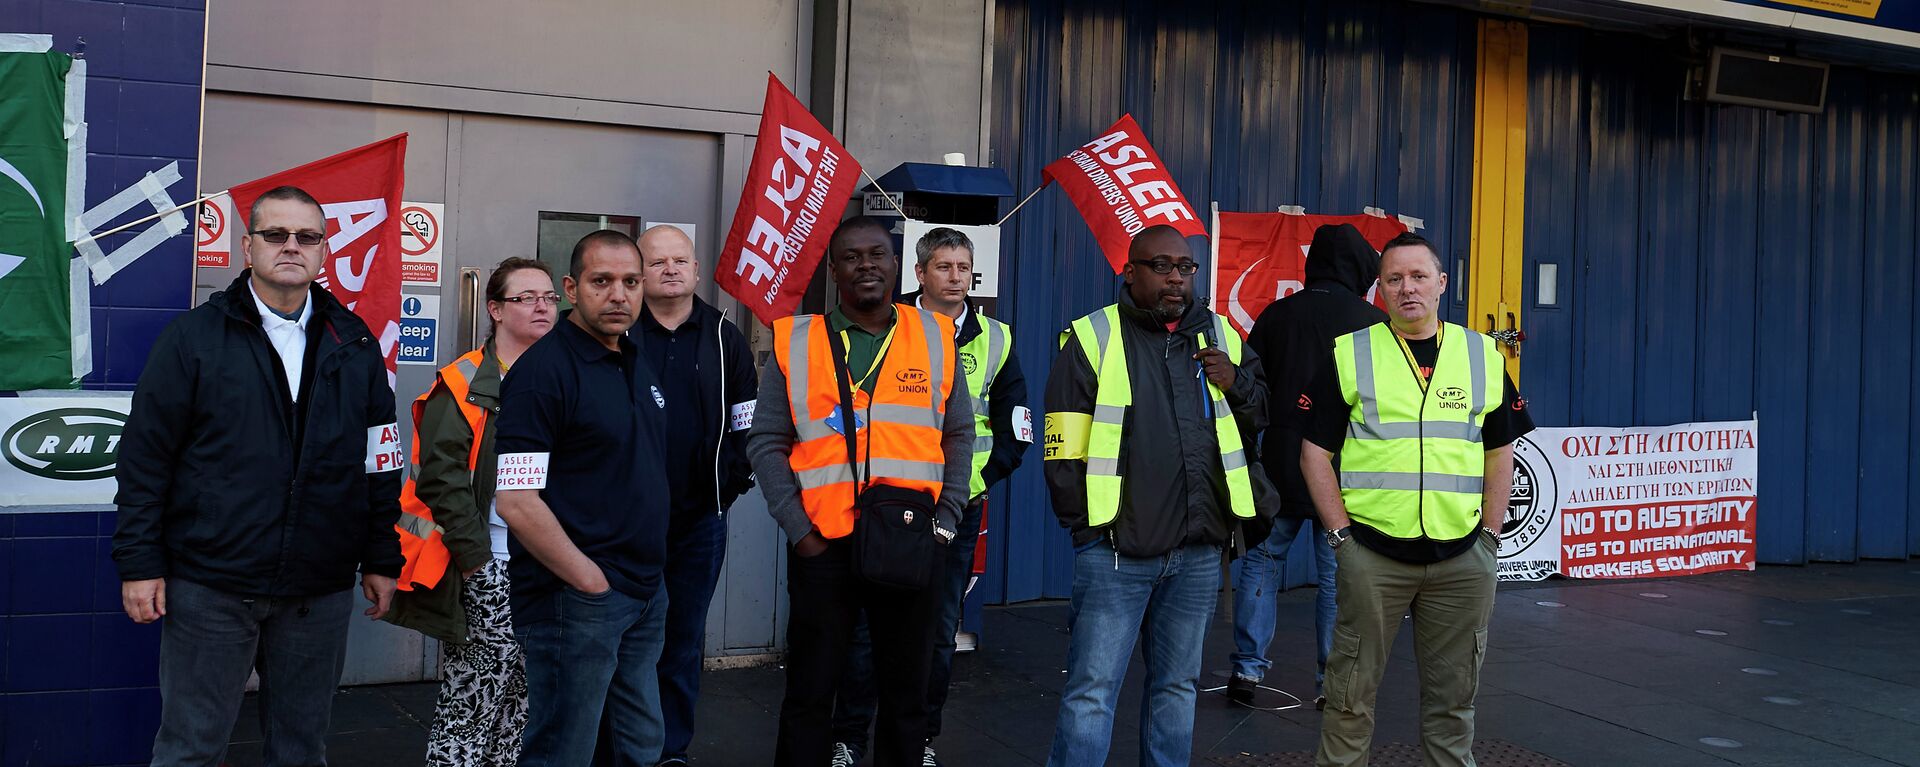 Protesters from the ASLEF and RMT unions stand at the locked gates of Brixton underground station during a tube strike in London on July 9, 2015 - Sputnik International, 1920, 19.06.2022